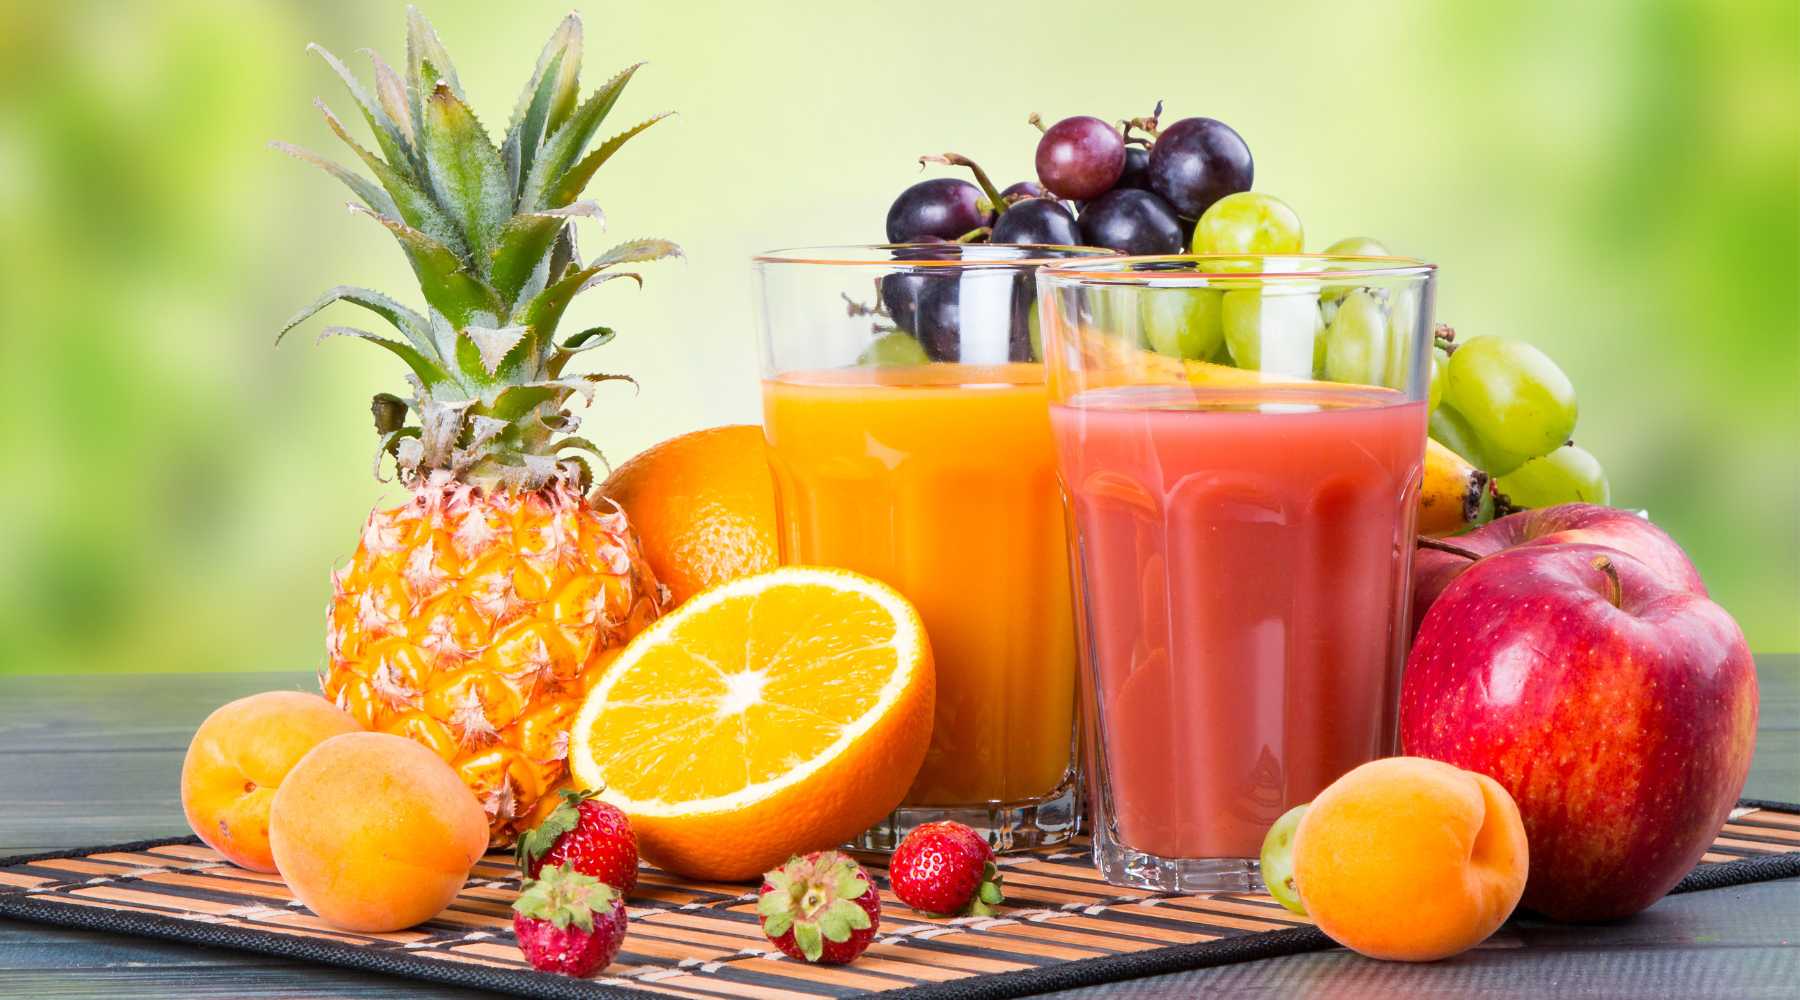 What Is Juicing?